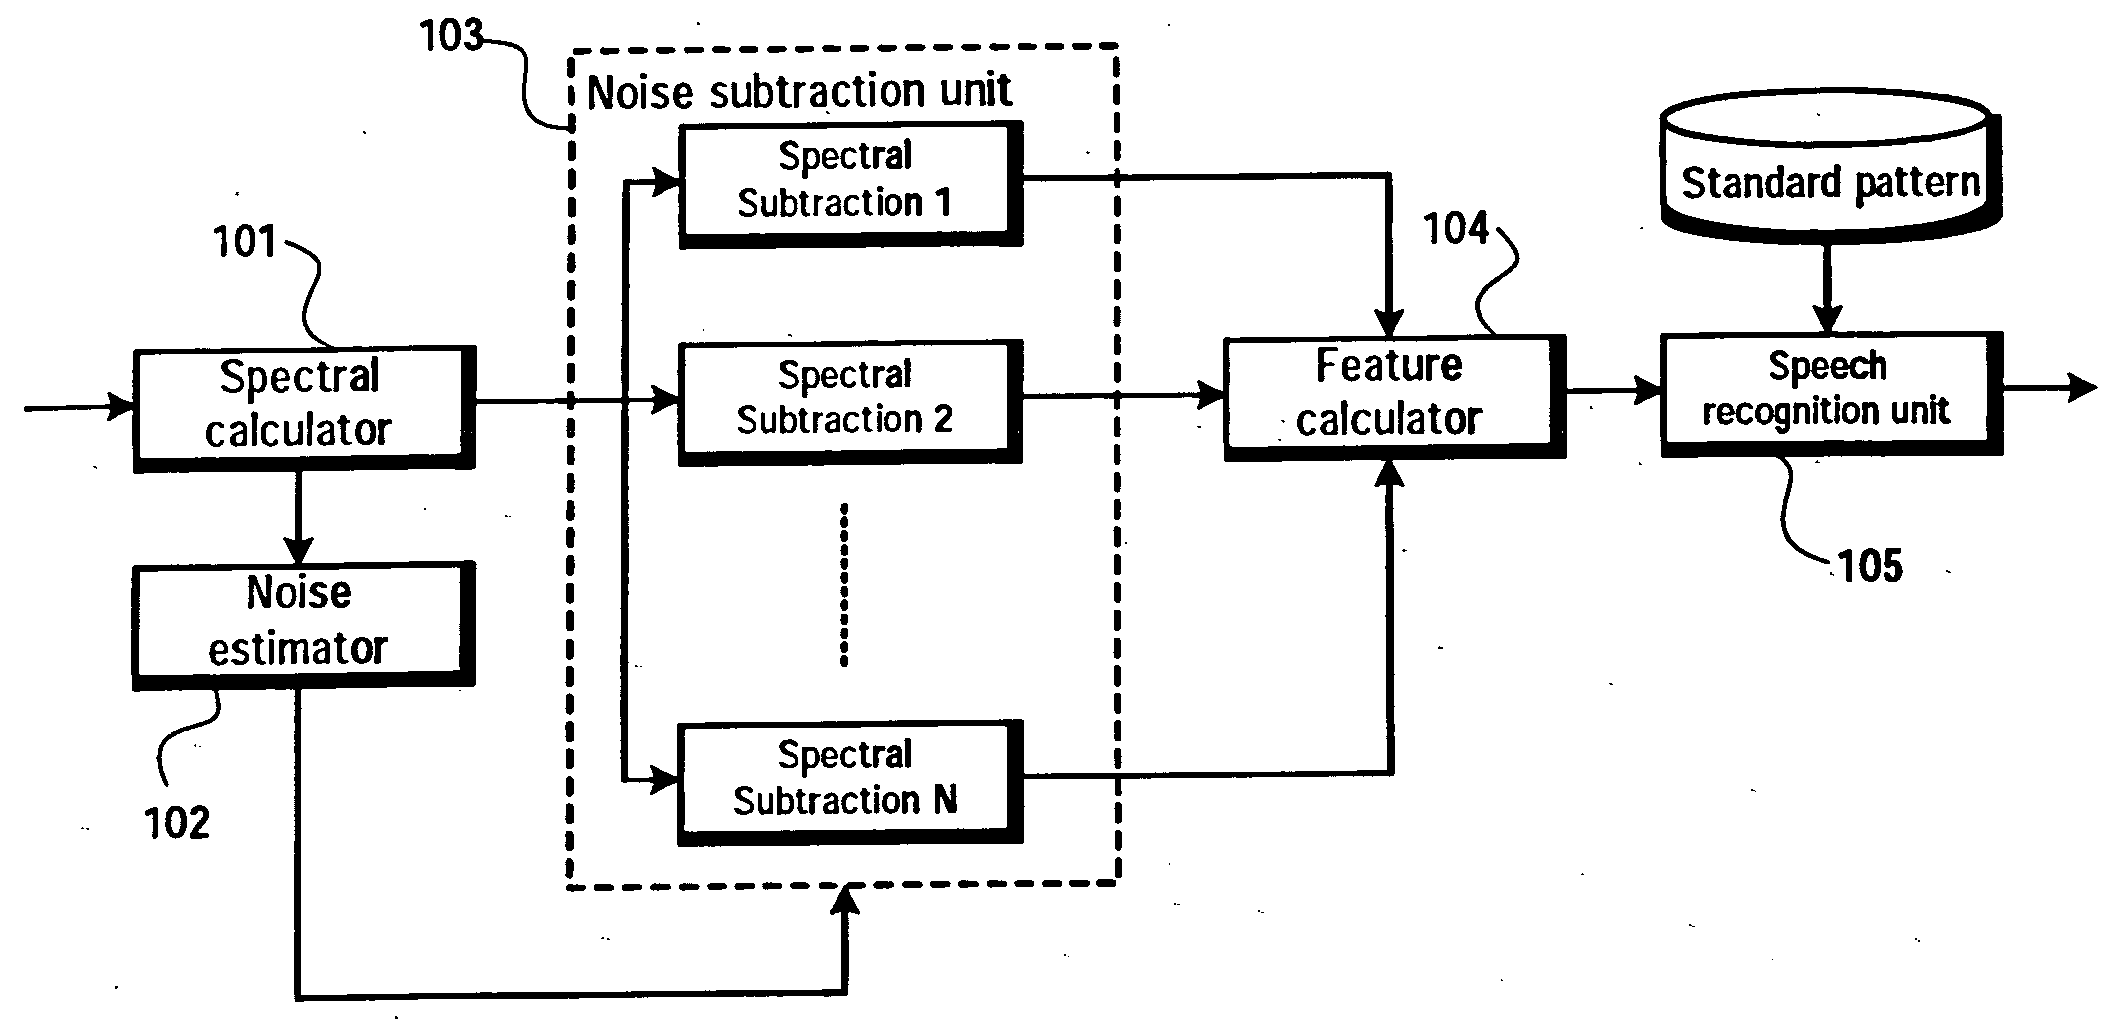 Speech recognition apparatus, method and computer program product